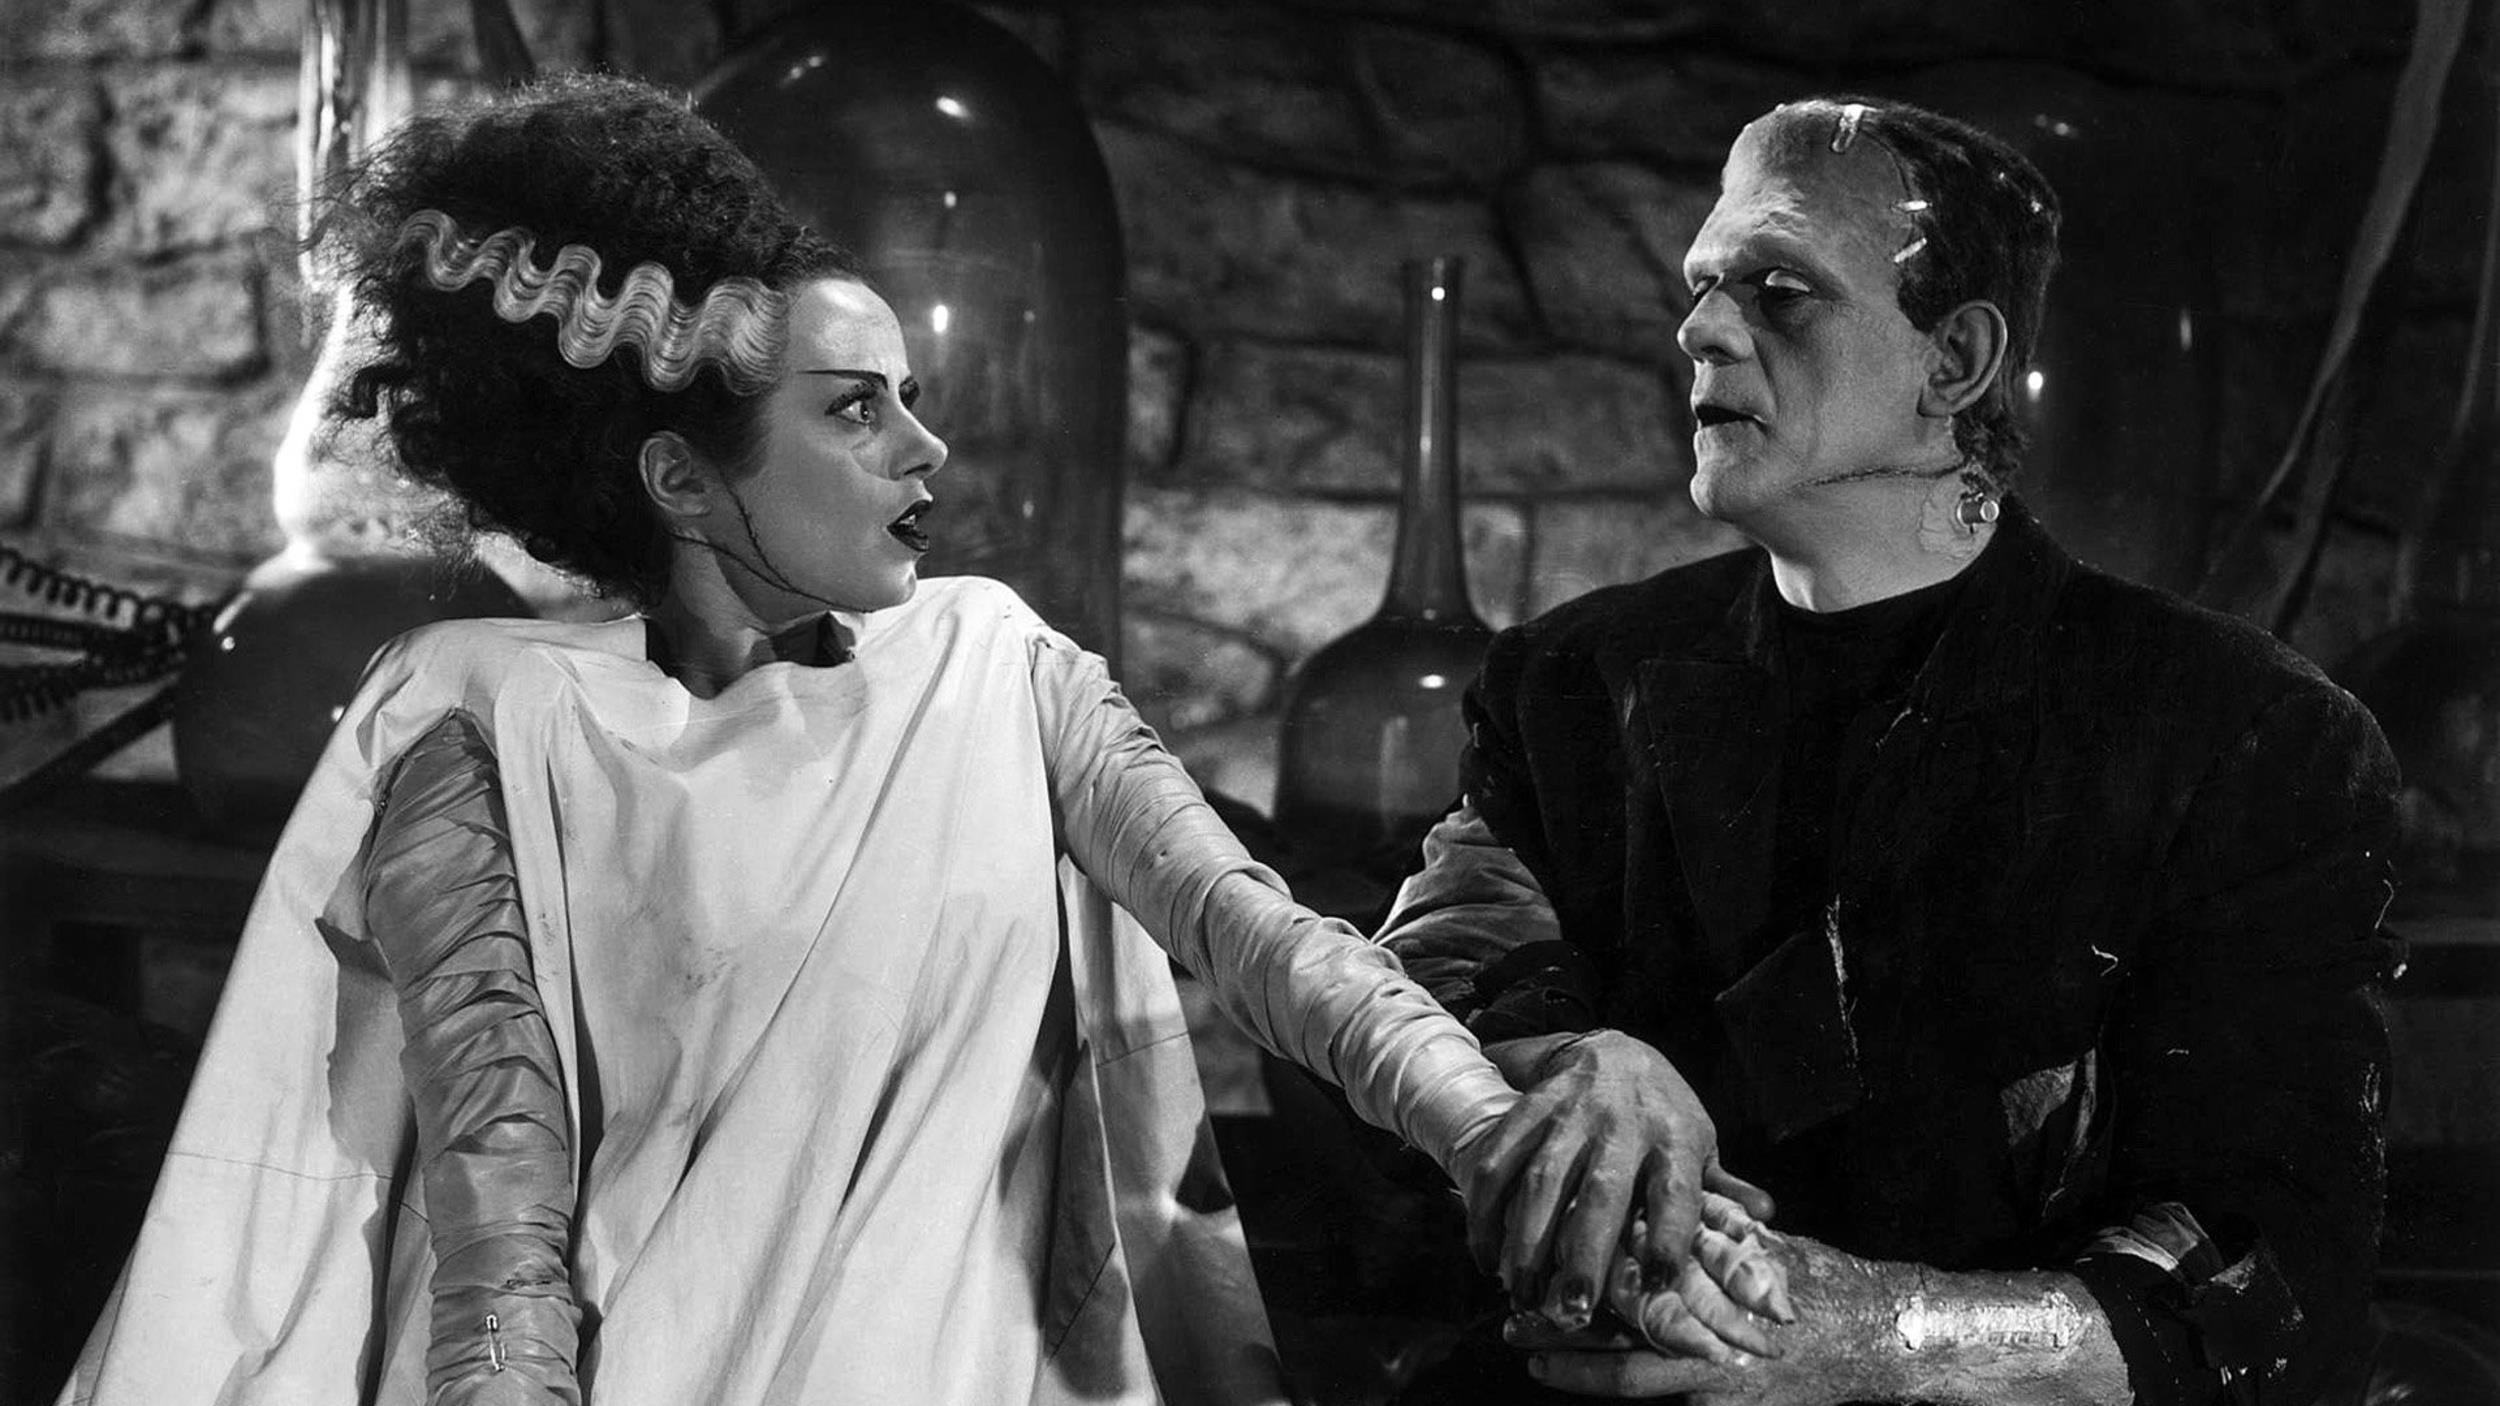 <p>This is the crown jewel of Universal’s monster series, primarily on the strength of James Whale’s “Frankenstein” and “Bride of Frankenstein." The latter is one of the finest, most heartbreaking horror films of all time (certainly one of the greatest sequels), which is likely due to Whale’s profound connection to the outcast nature of his characters (though friends and colleagues dispute any homoerotic reading). Karloff is skillful, veering from fright to tenderness to fury as the monster set the template for every subsequent portrayal. Lugosi joins the fun in “Son of Frankenstein” and gives one of his best performances as Ygor.</p><p><a href='https://www.msn.com/en-us/community/channel/vid-cj9pqbr0vn9in2b6ddcd8sfgpfq6x6utp44fssrv6mc2gtybw0us'>Follow us on MSN to see more of our exclusive entertainment content.</a></p>